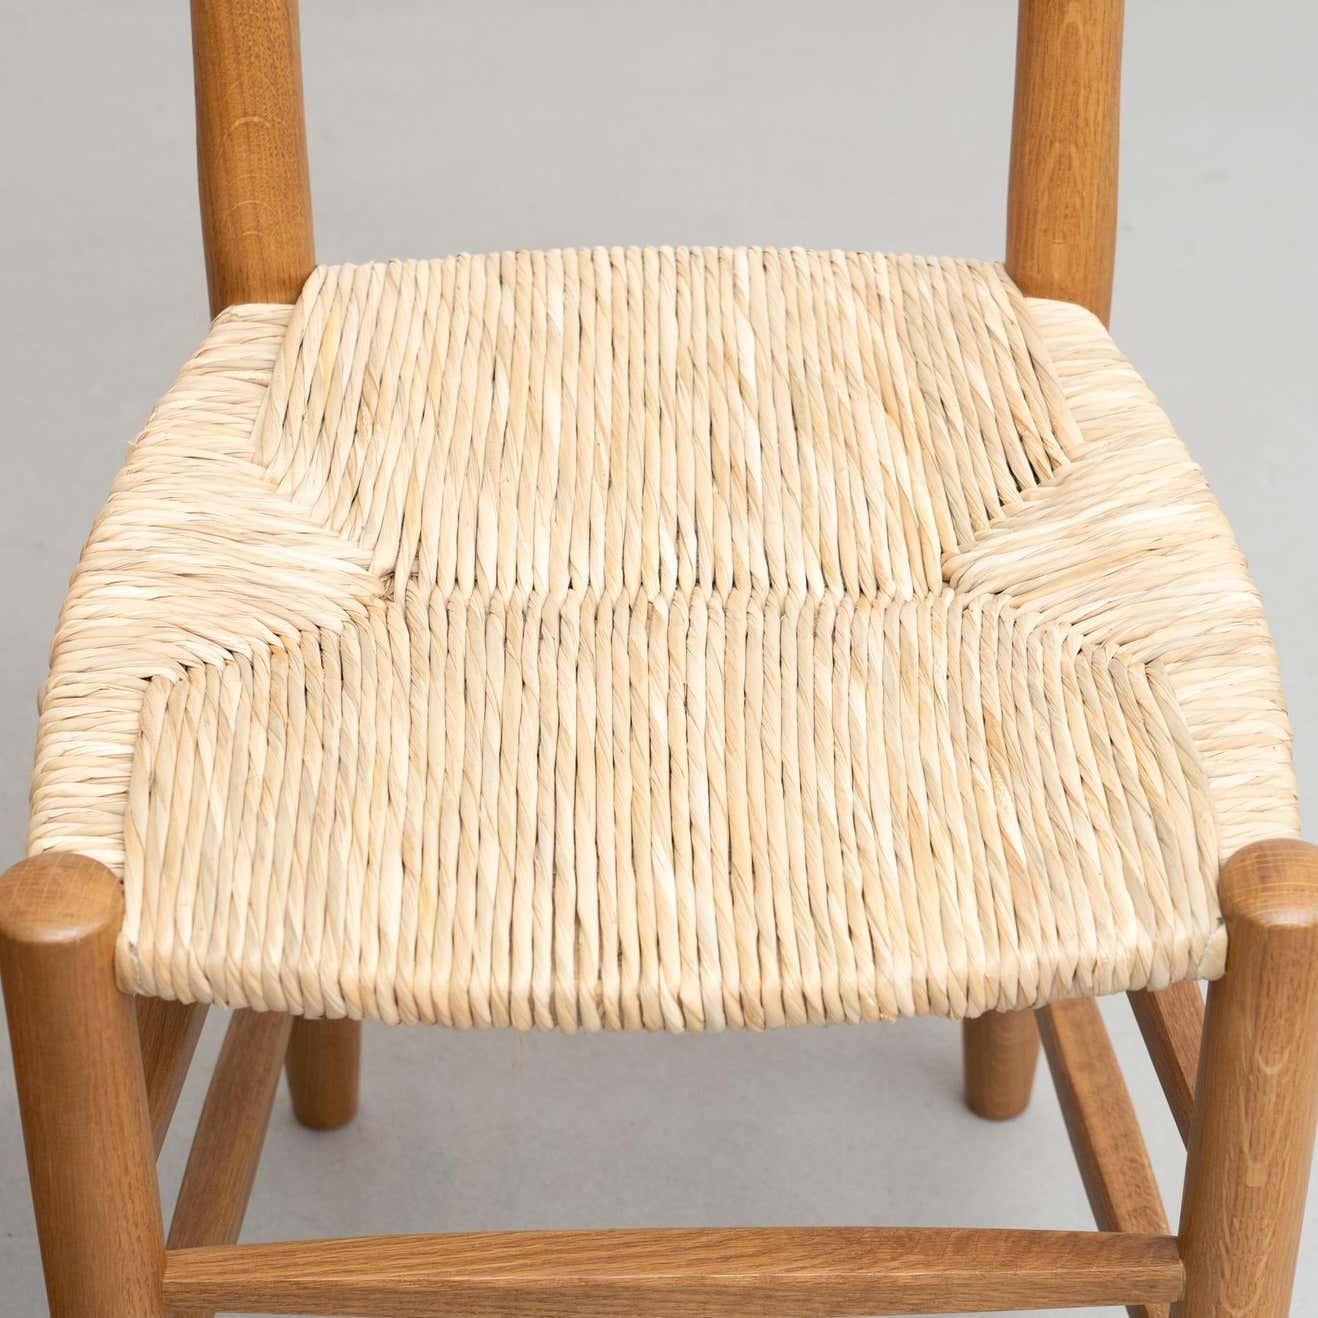 Set of Six After Charlotte Perriand N.19 Chairs, Wood Rattan, Mid-Century Modern For Sale 5